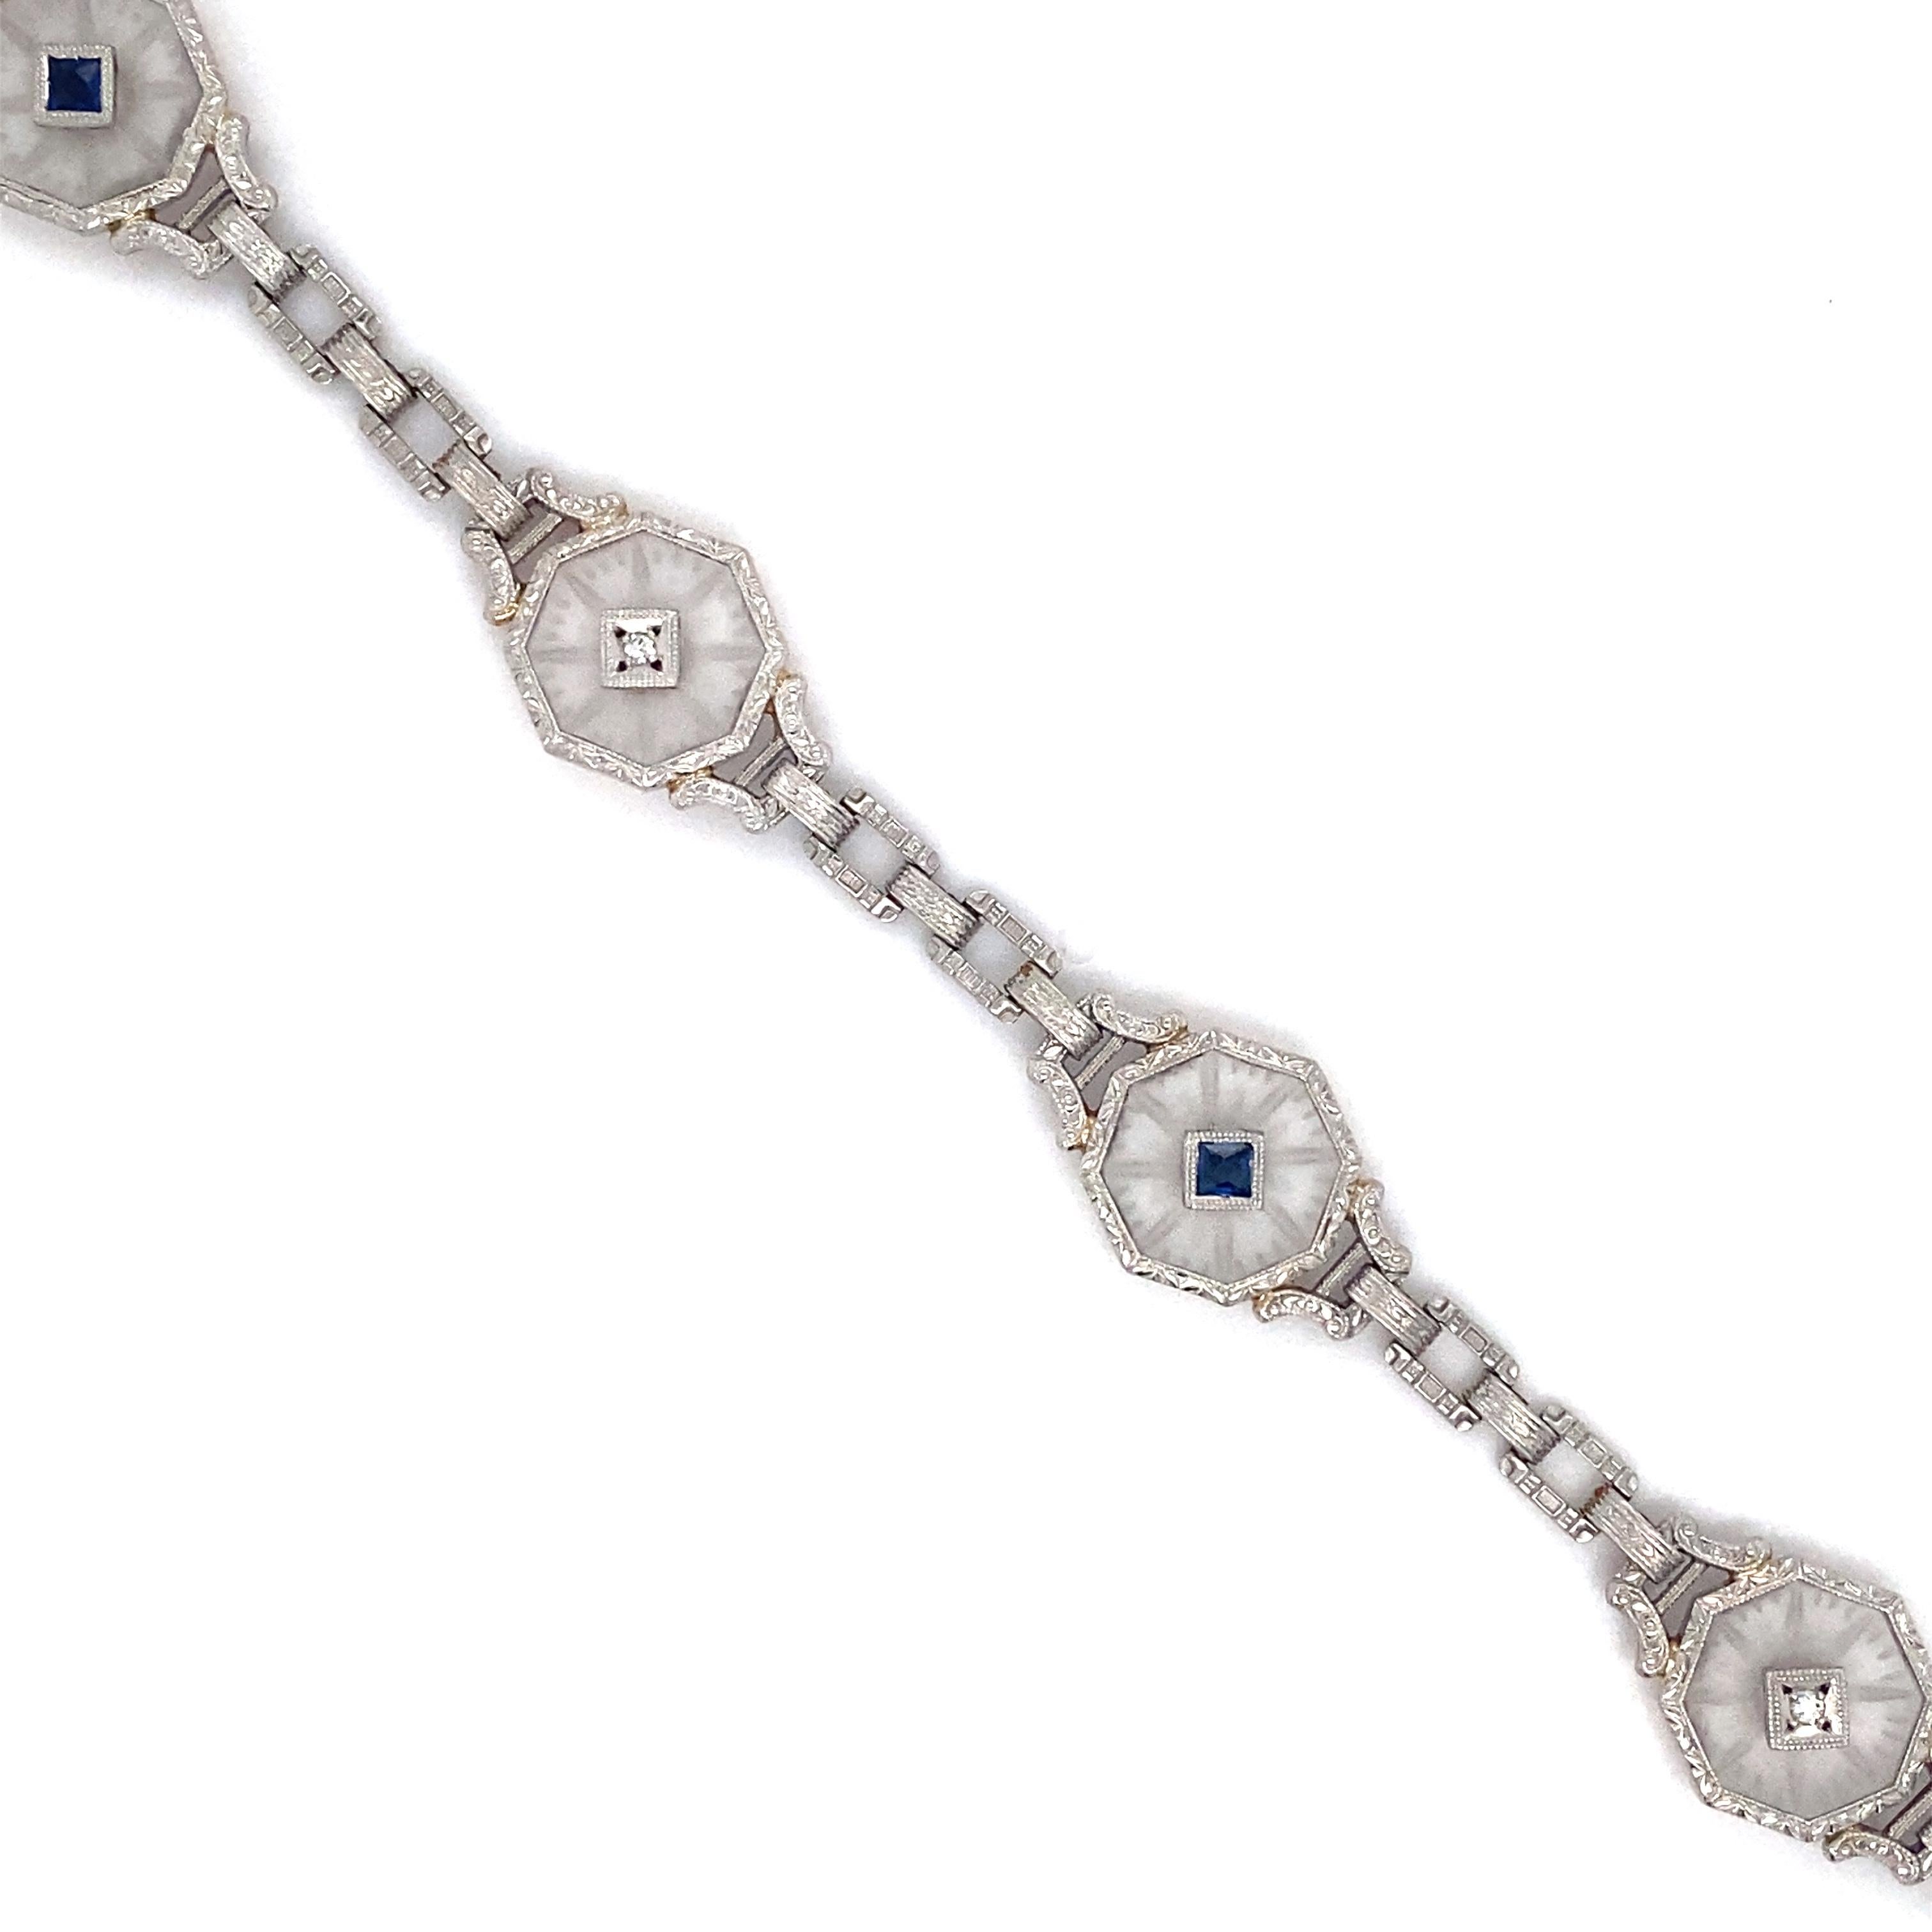 French Cut 1880s Victorian Rock Crystal, Sapphire and Diamond Bracelet in 14 Karat Gold